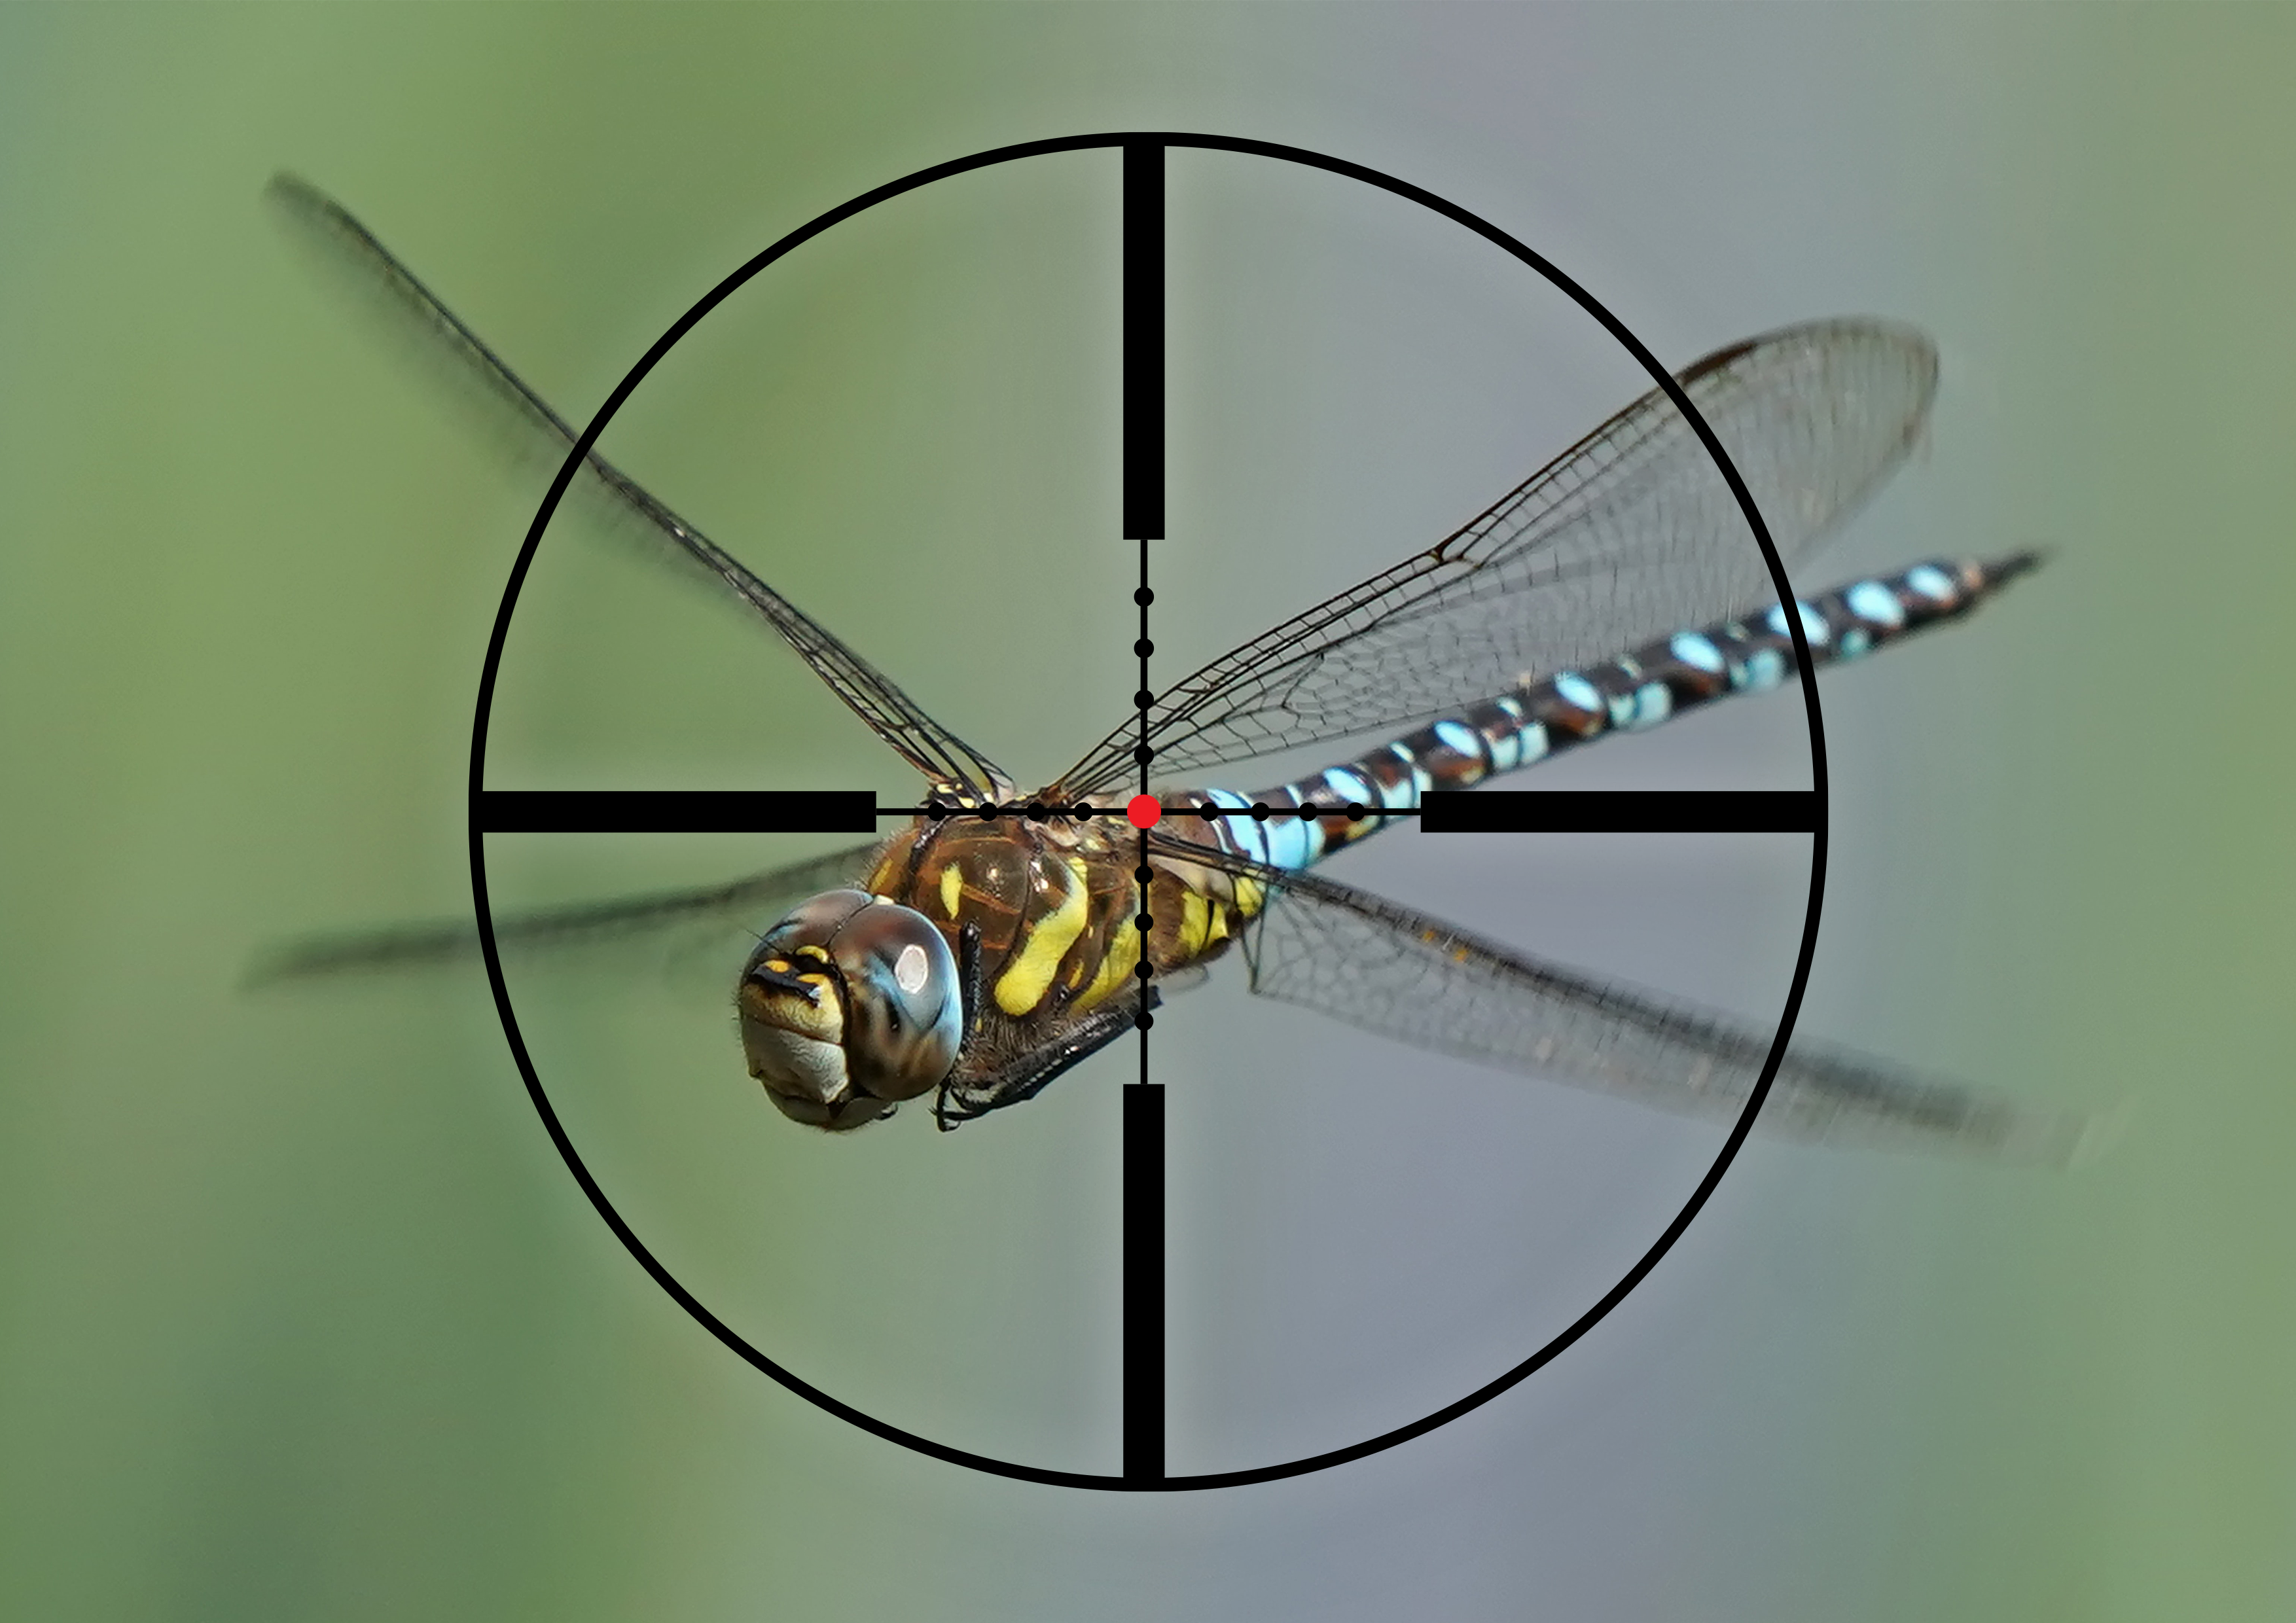 Tricky target, the dragonfly. But, was the Loof, 17/260, probably the ultimate varmint cartridge, up for the job?